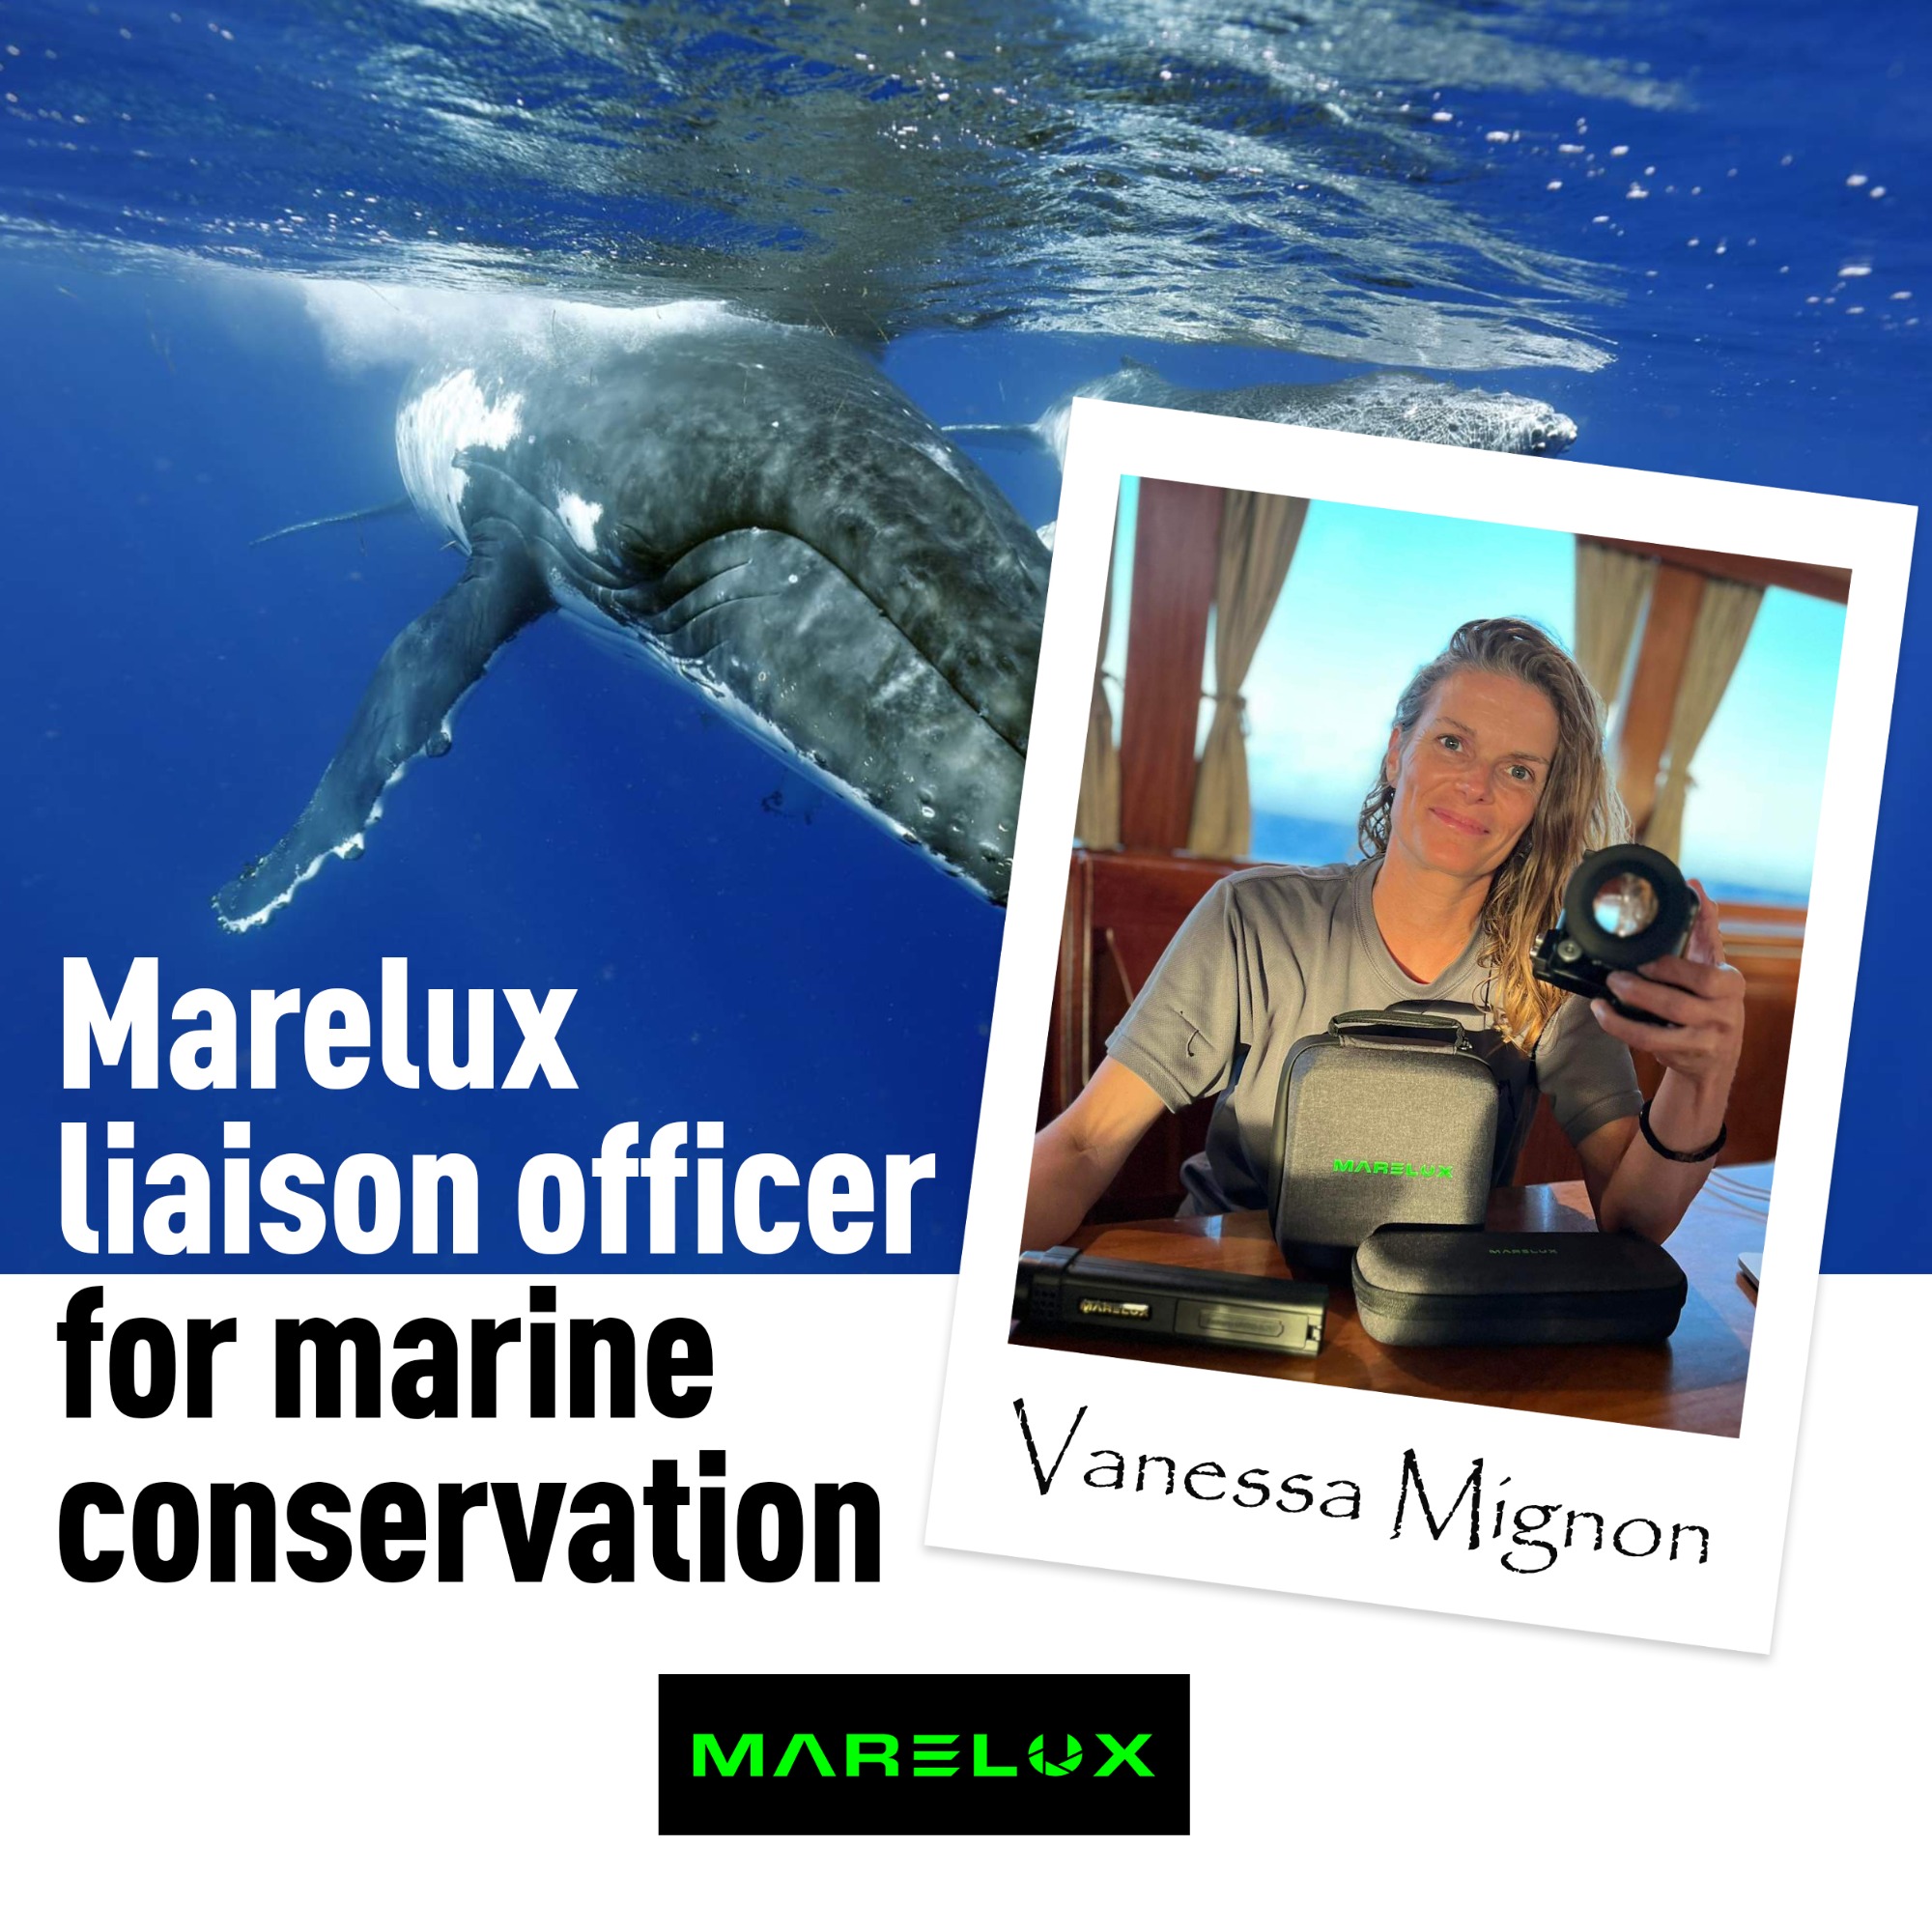 Marelux liaison officer for marine conservation